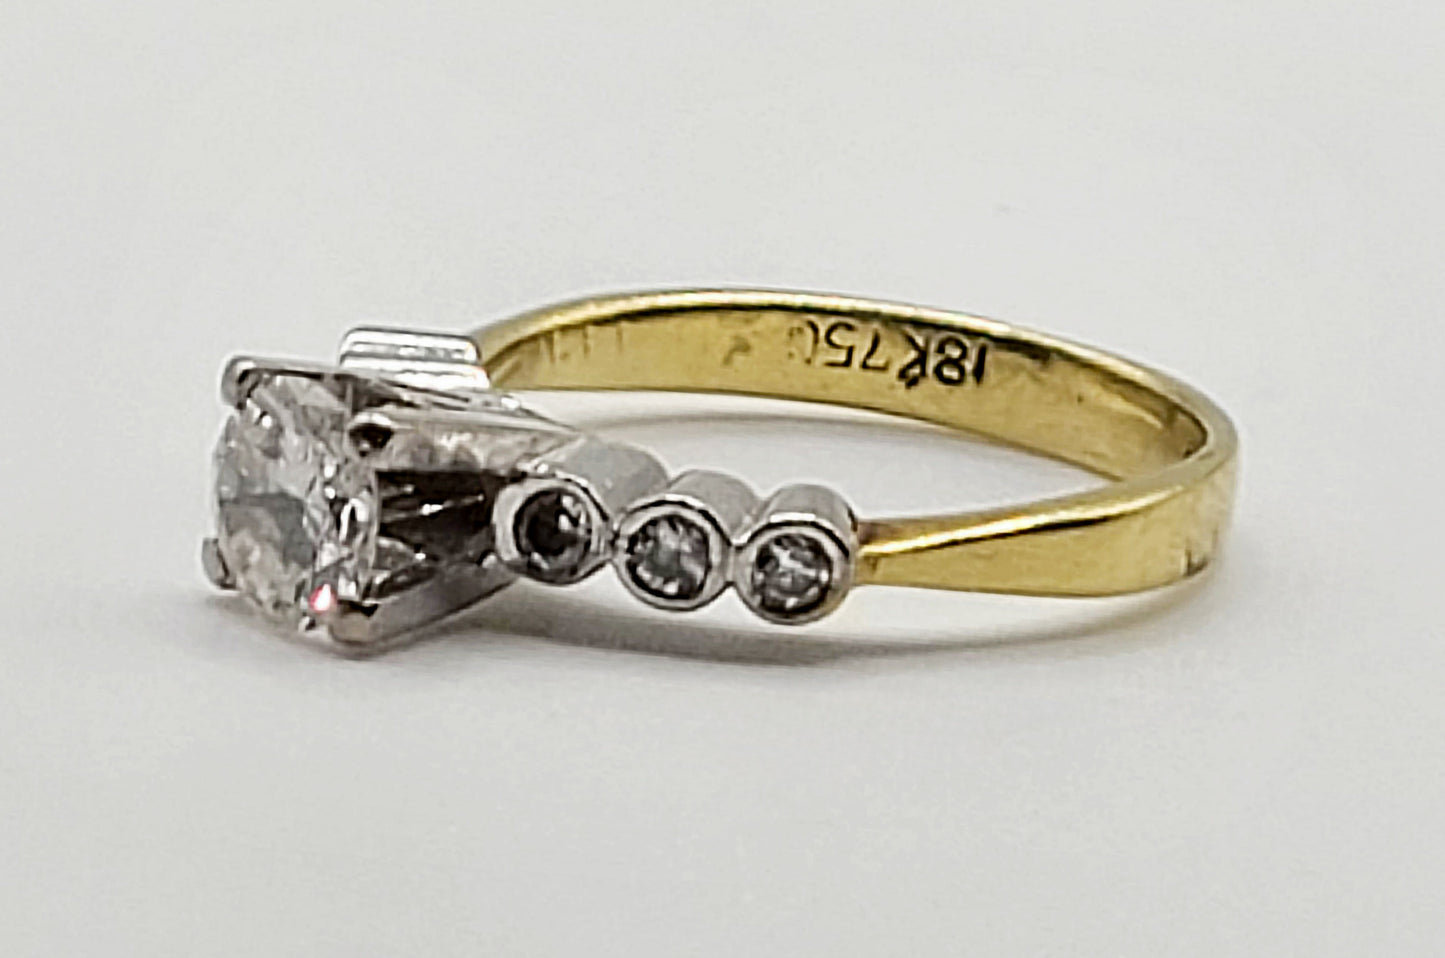 Art deco Ring set with 7 Diamonds on 18ct Gold - Size J1/2